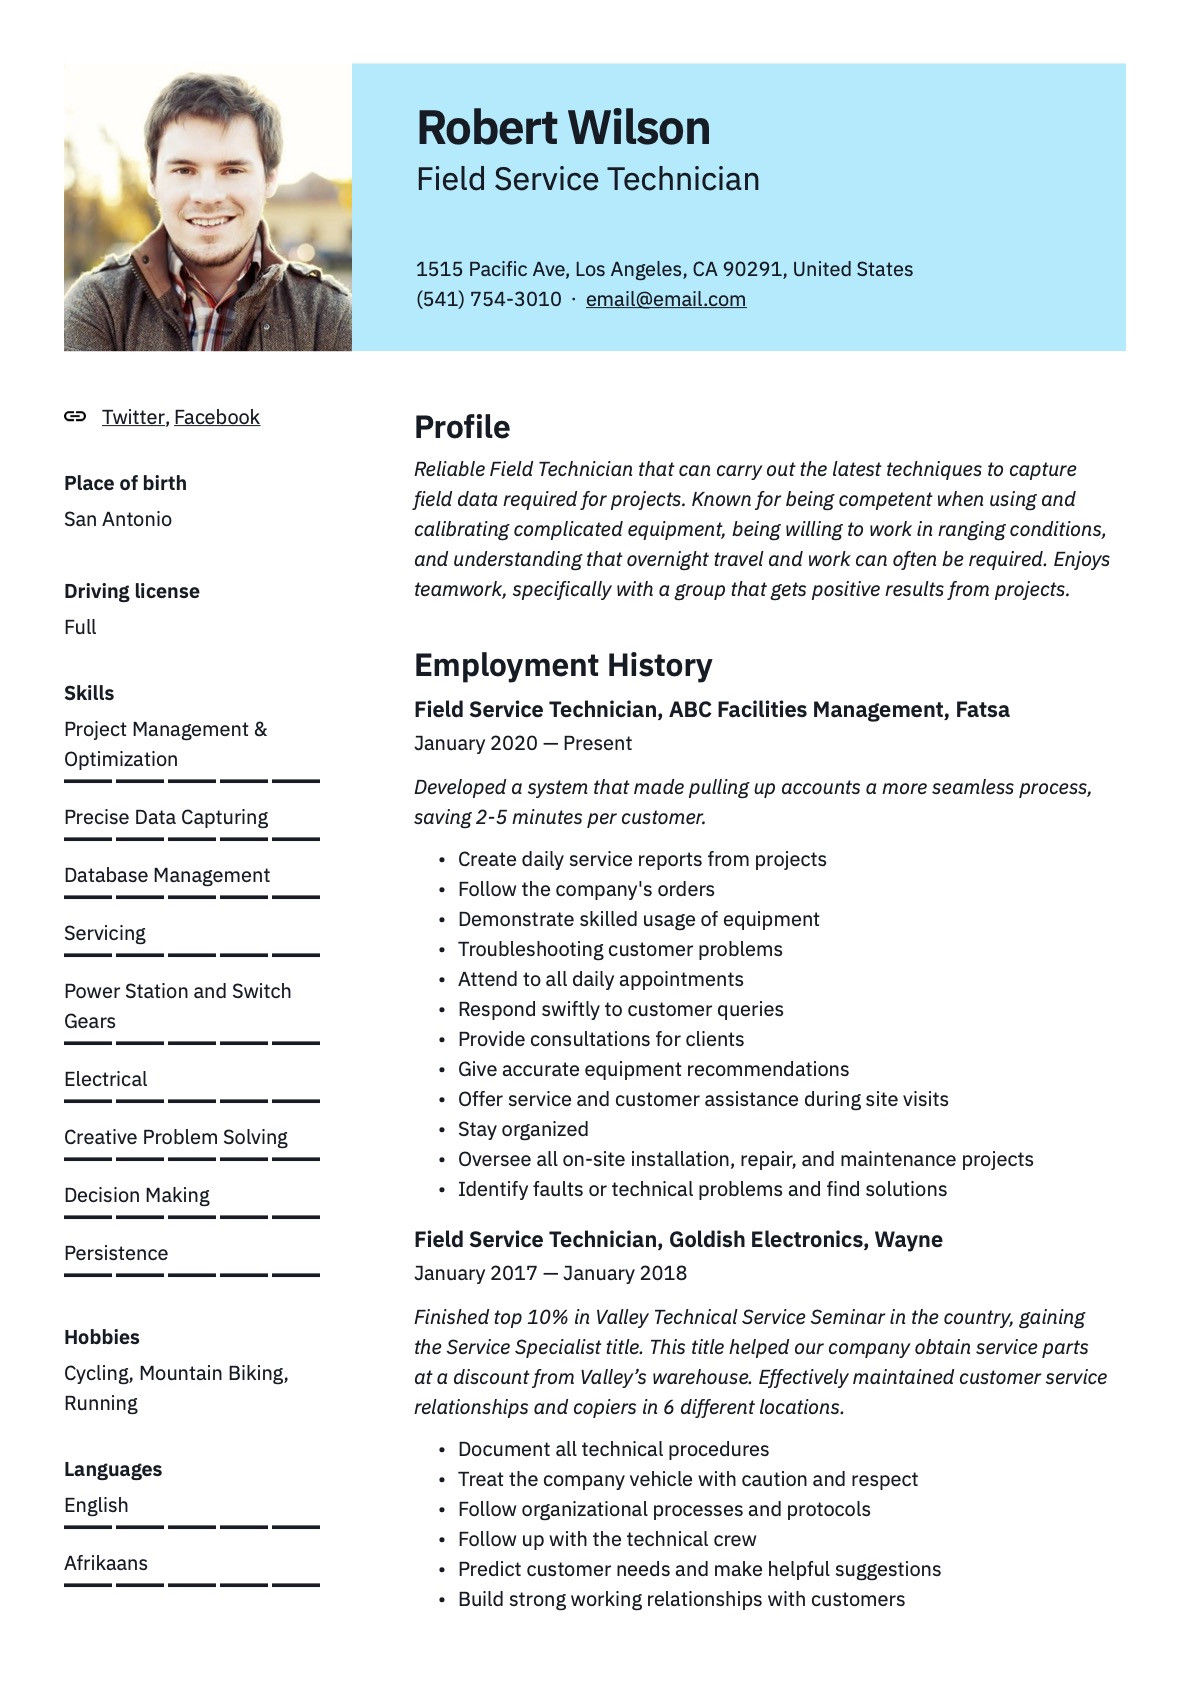 Fire and Gas Technician Resume Sample Field Service Technician Resume & Guide  20 Examples 2022